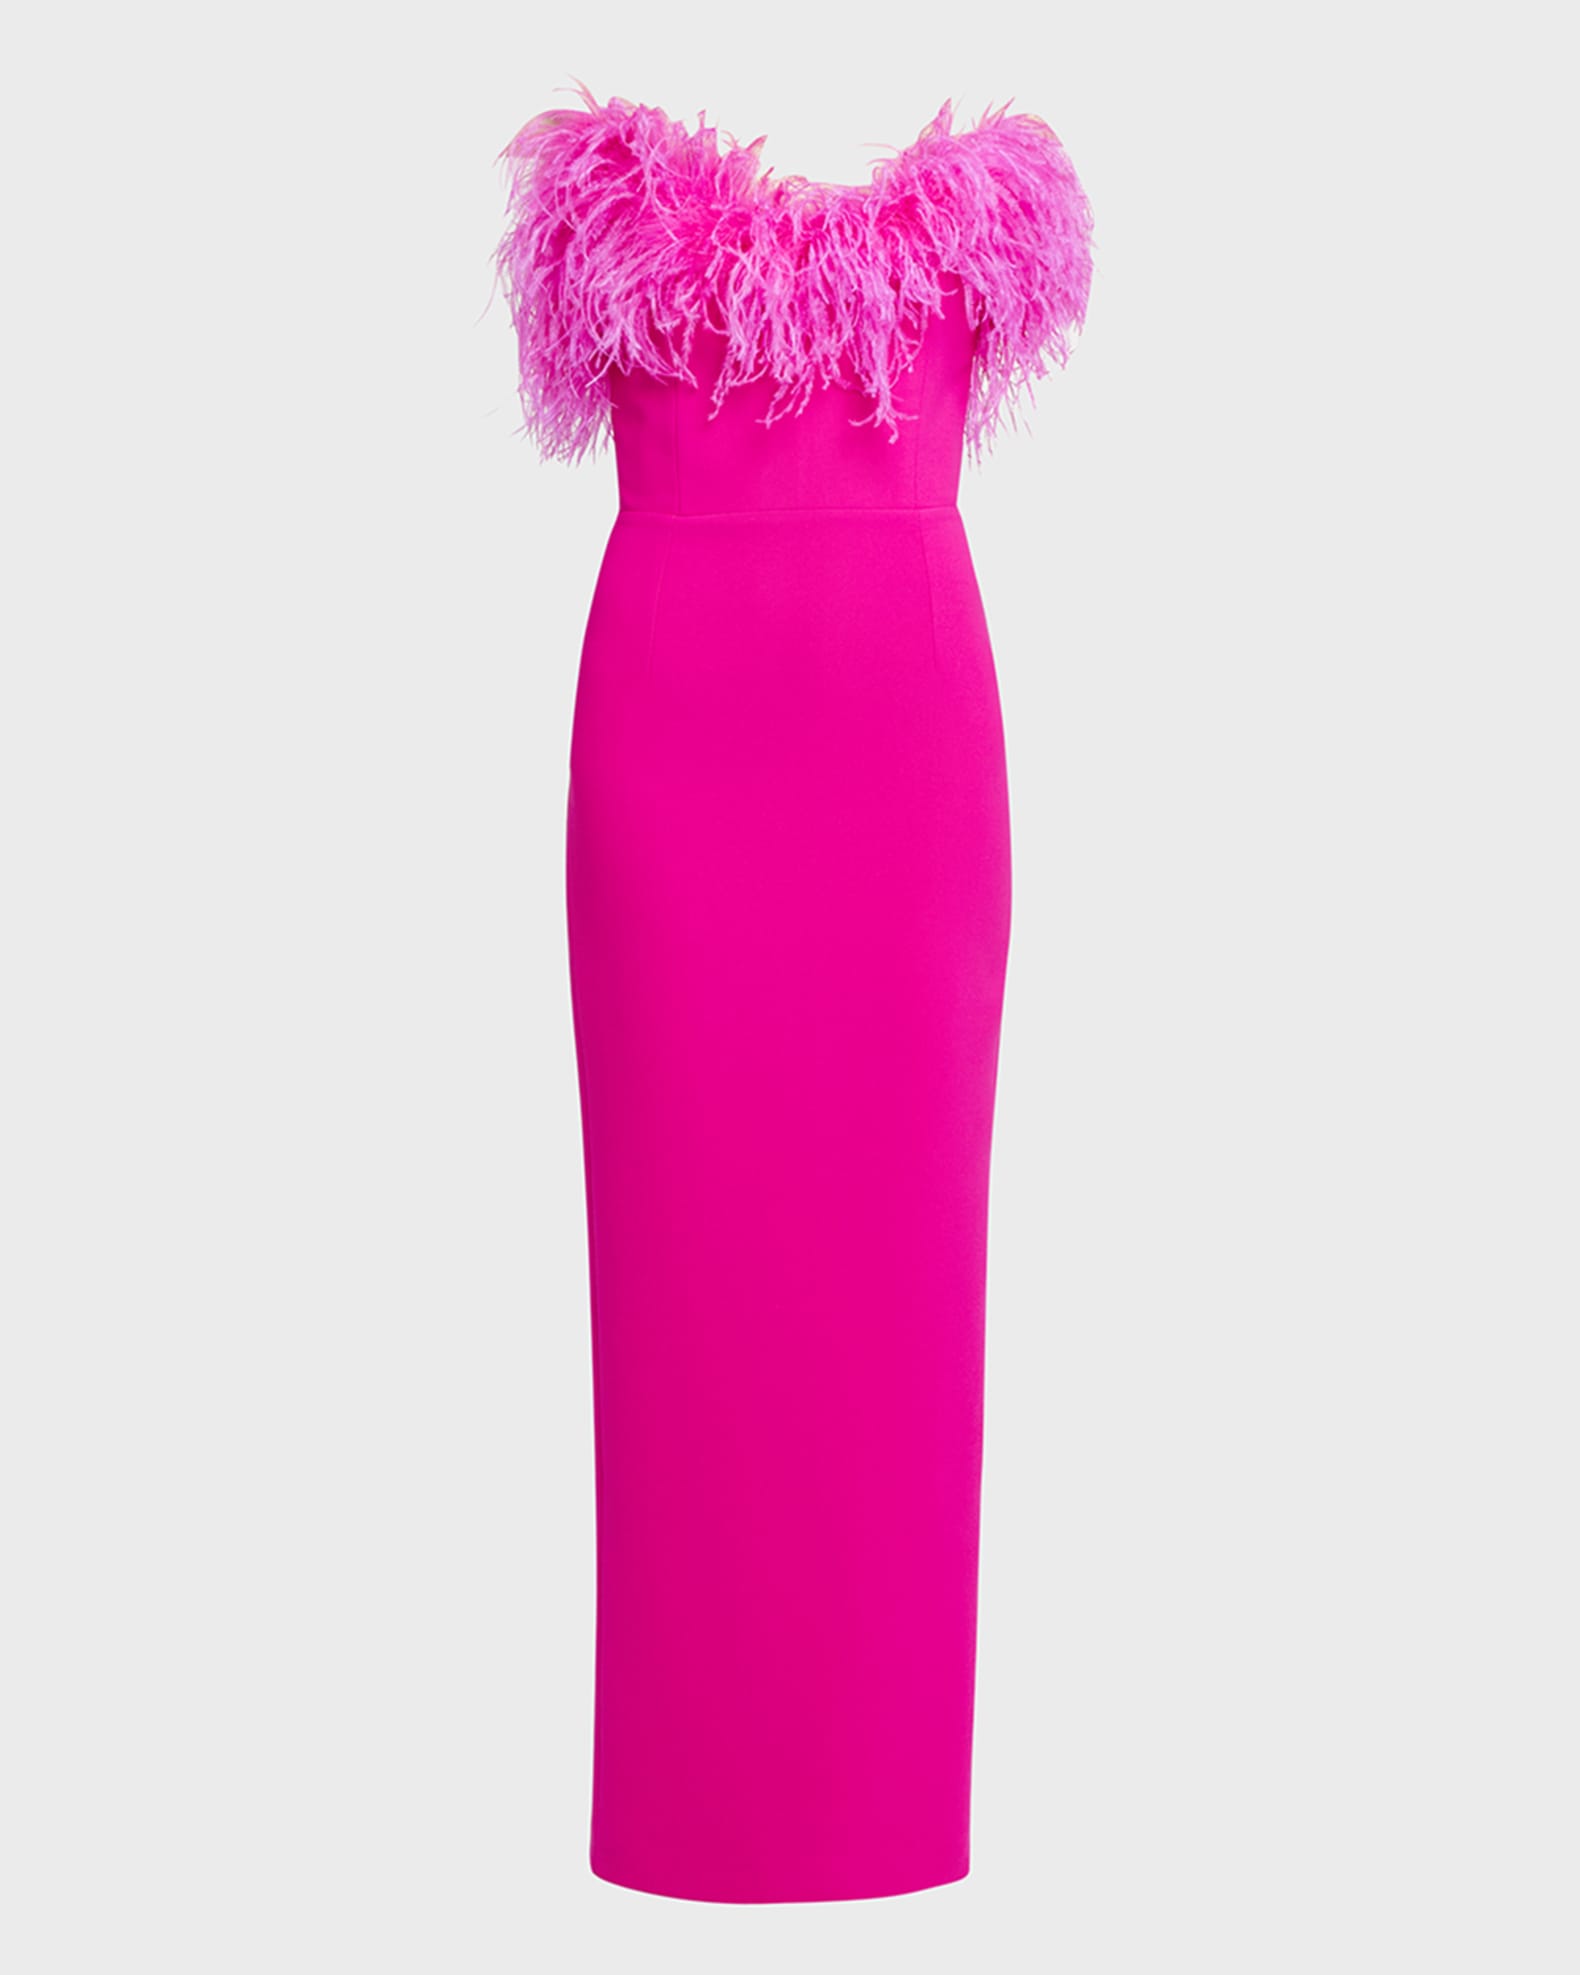 The New Arrivals by Ilkyaz Ozel Lena Strapless Feathered Maxi Dress ...